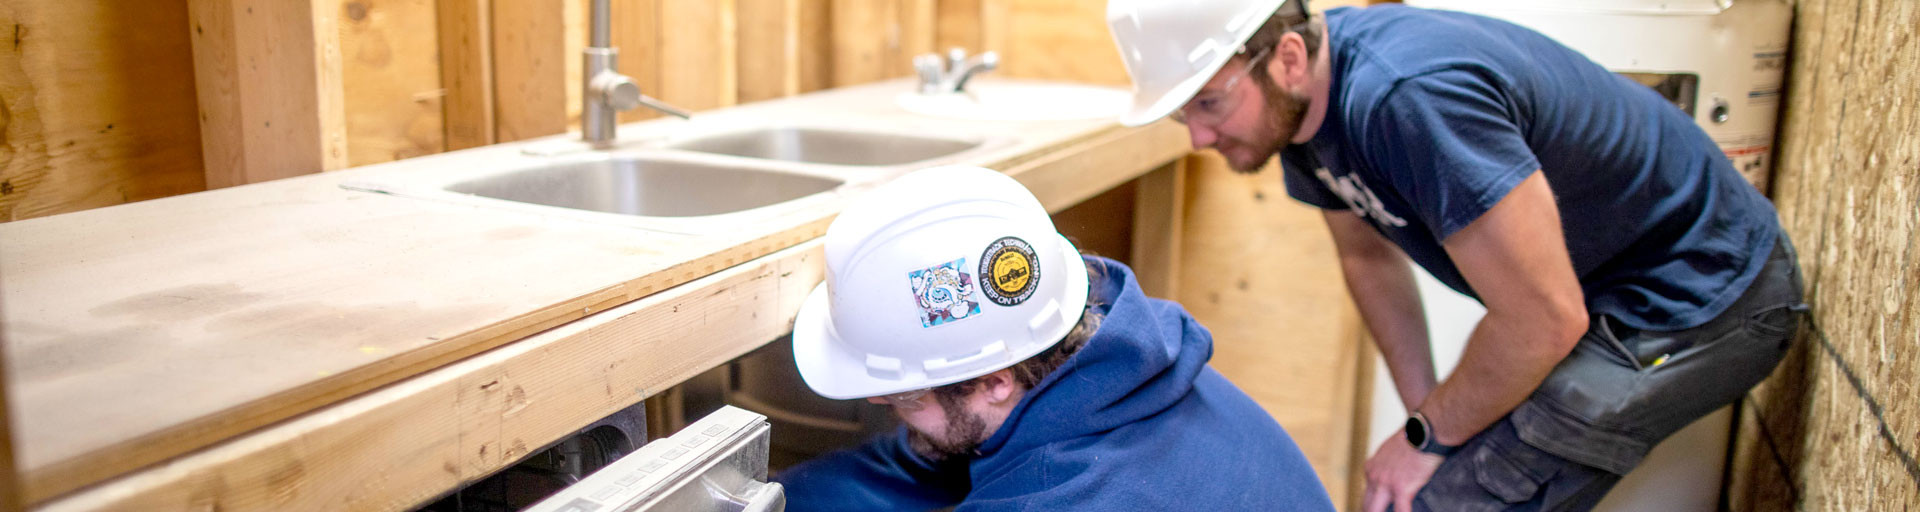 Two students in hard hats working on practice sink